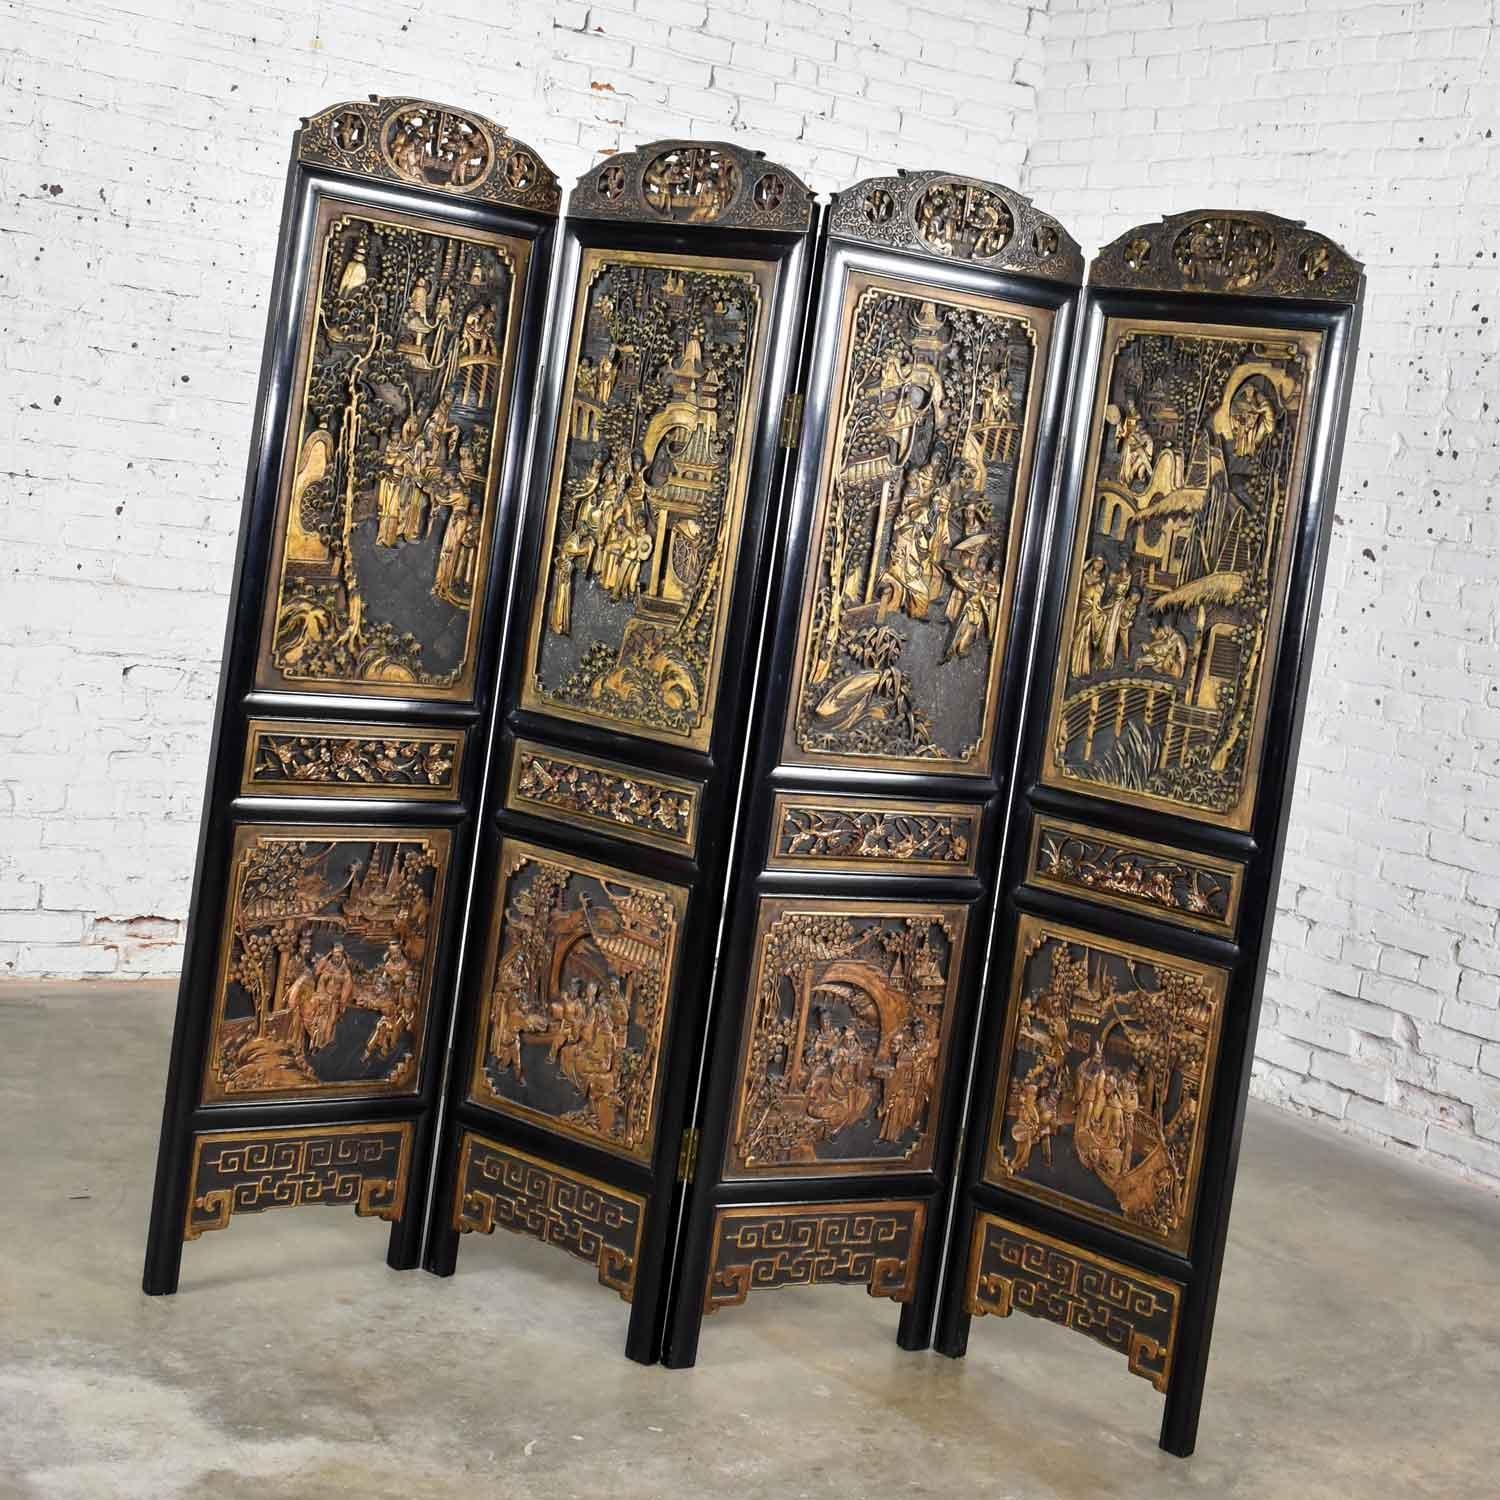 Handsome Asian folding screen or room divider with four amazing hand carved panels that are lacquered and gilded. It is in fabulous vintage condition with no outstanding flaws we have seen, circa mid-late 20th century. 

This is one of the most